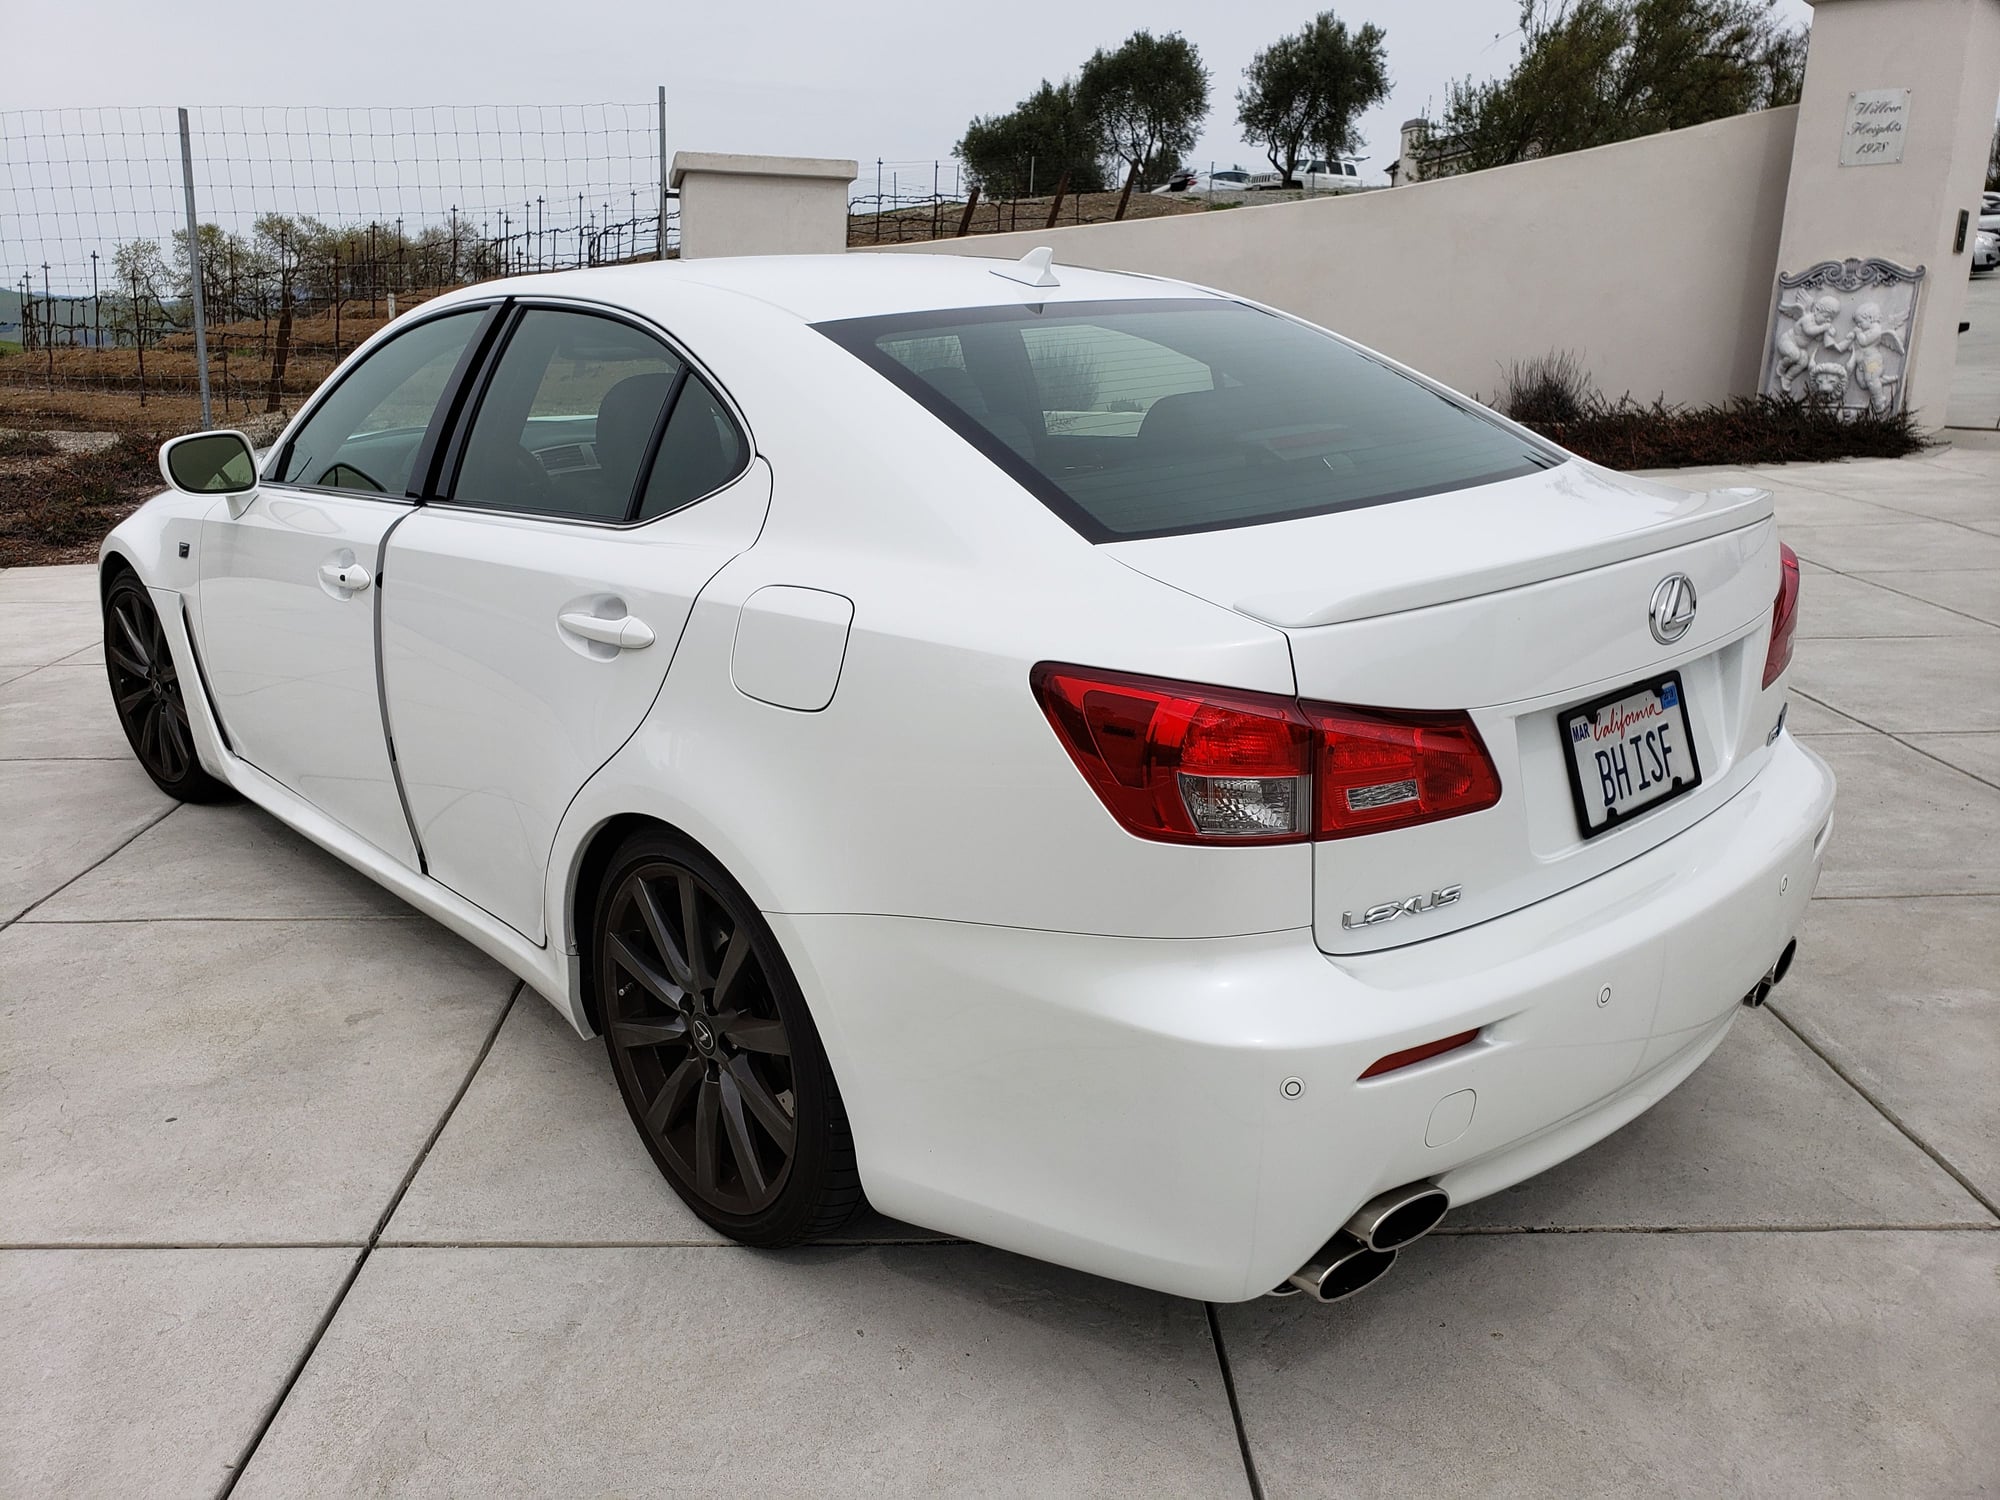 2008 Lexus IS F - 2008 ISF w/2100 Original Miles - Original Owner in Original New Condition - New - VIN JTHBP262185001275 - 2,100 Miles - 8 cyl - 2WD - Automatic - Sedan - White - Morgan Hill, CA 95037, United States